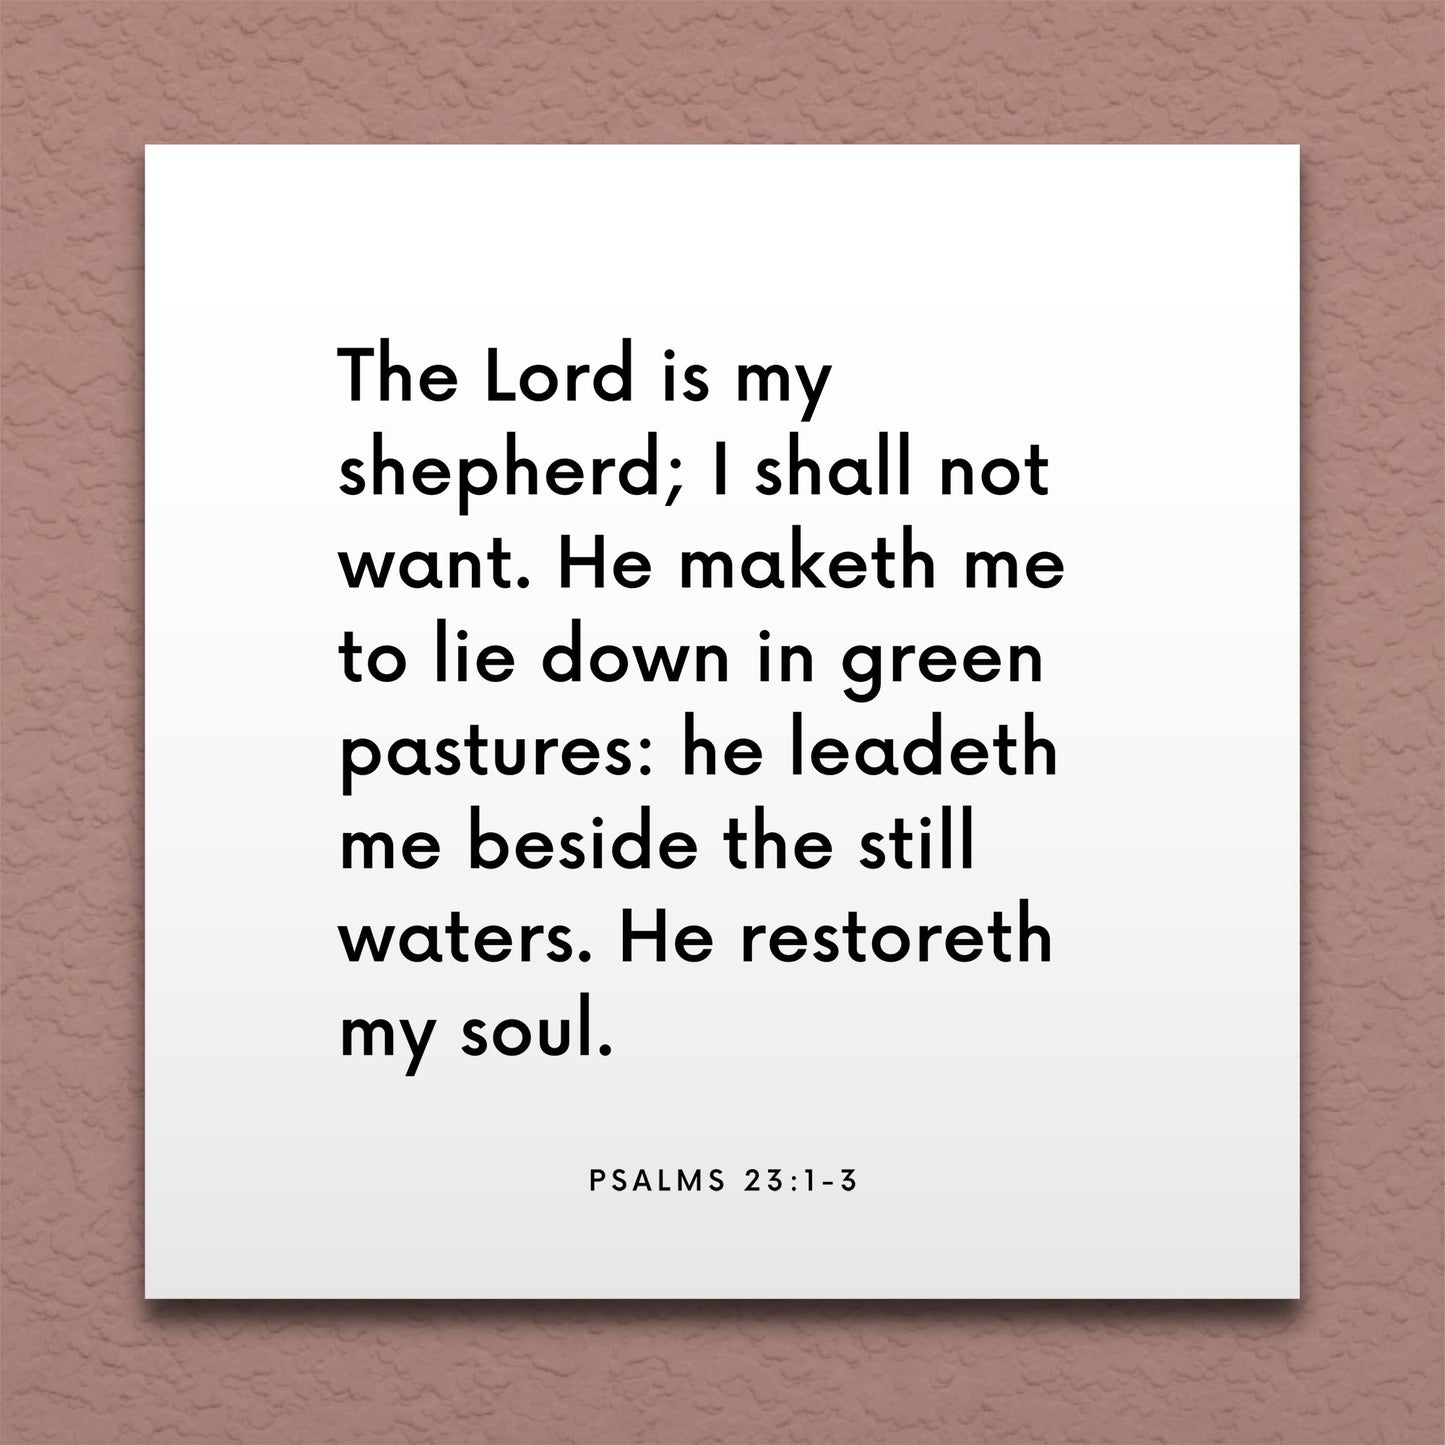 Wall-mounted scripture tile for Psalms 23:1-3 - "The Lord is my shepherd; I shall not want"